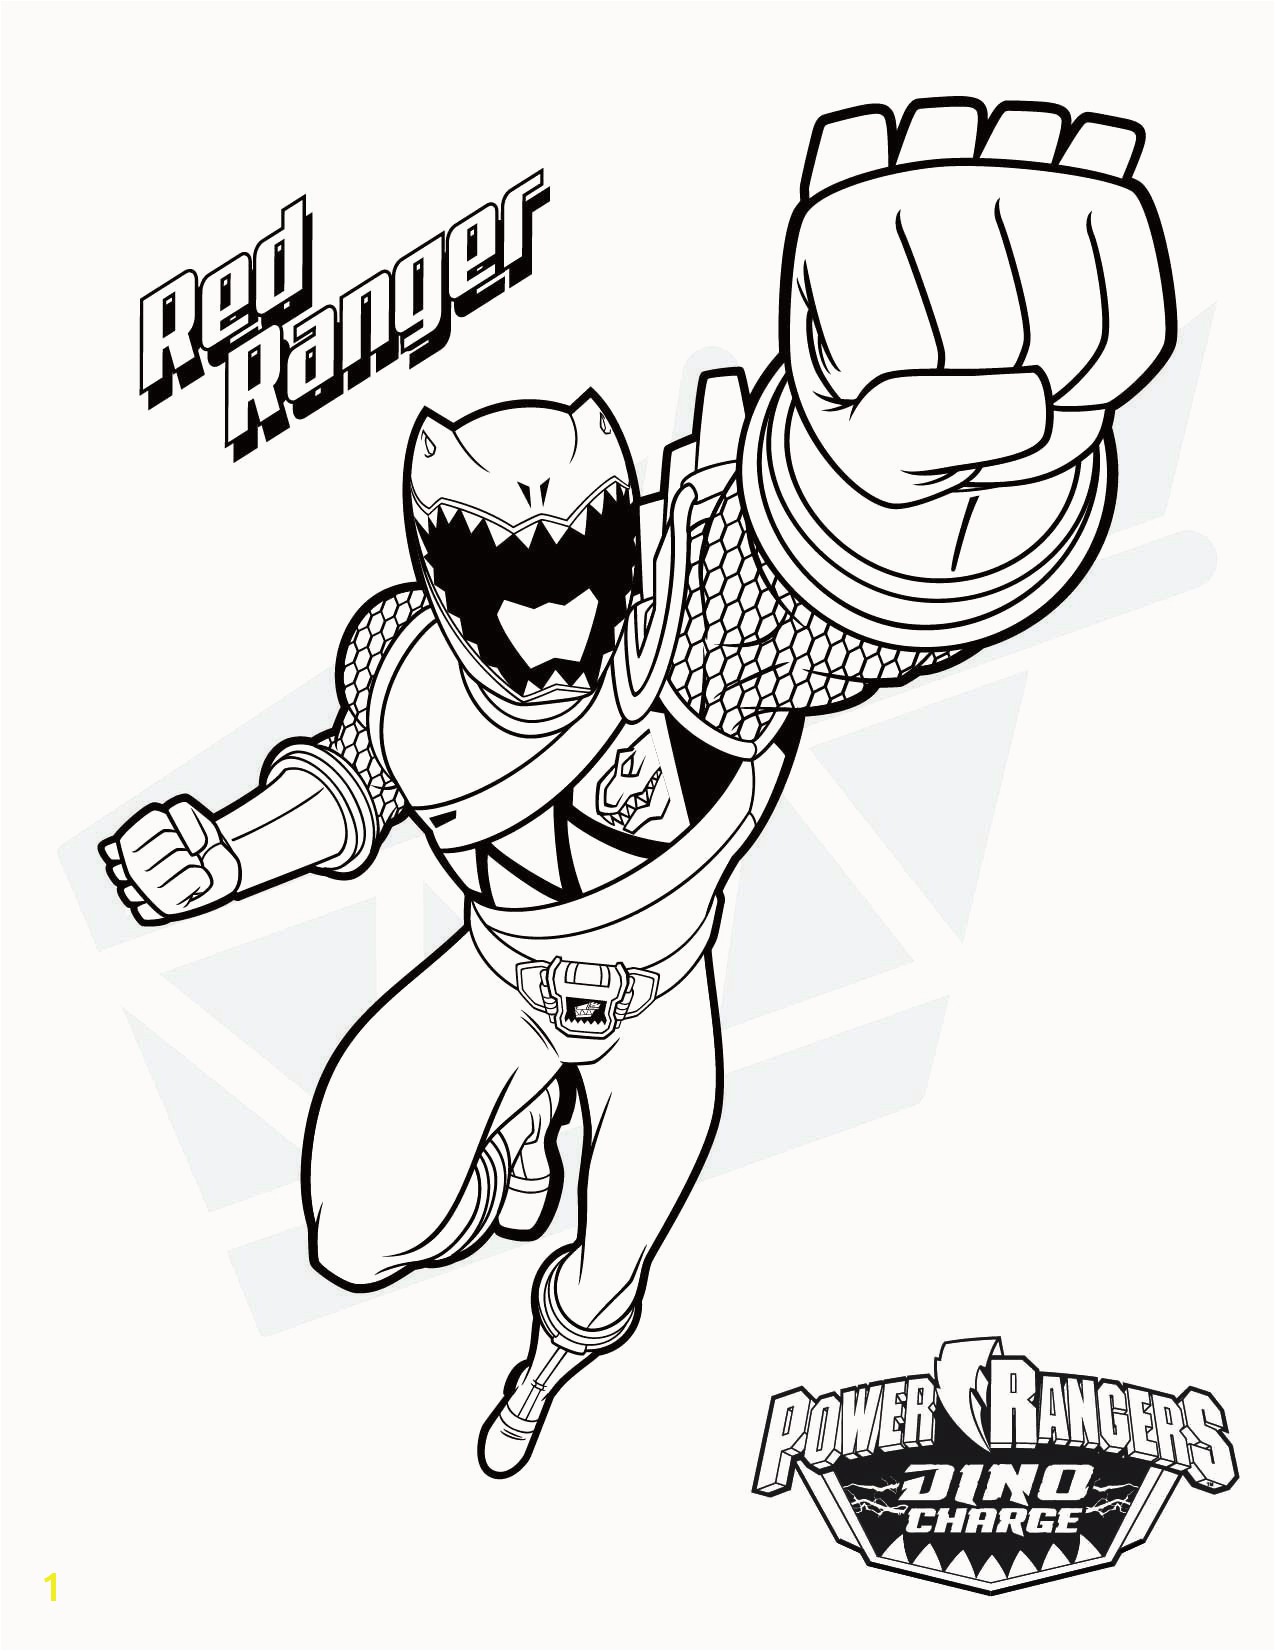 Dinosaur Power Ranger Coloring Pages Mighty Morphin Power Rangers Coloring Pages Power Rangers Coloring